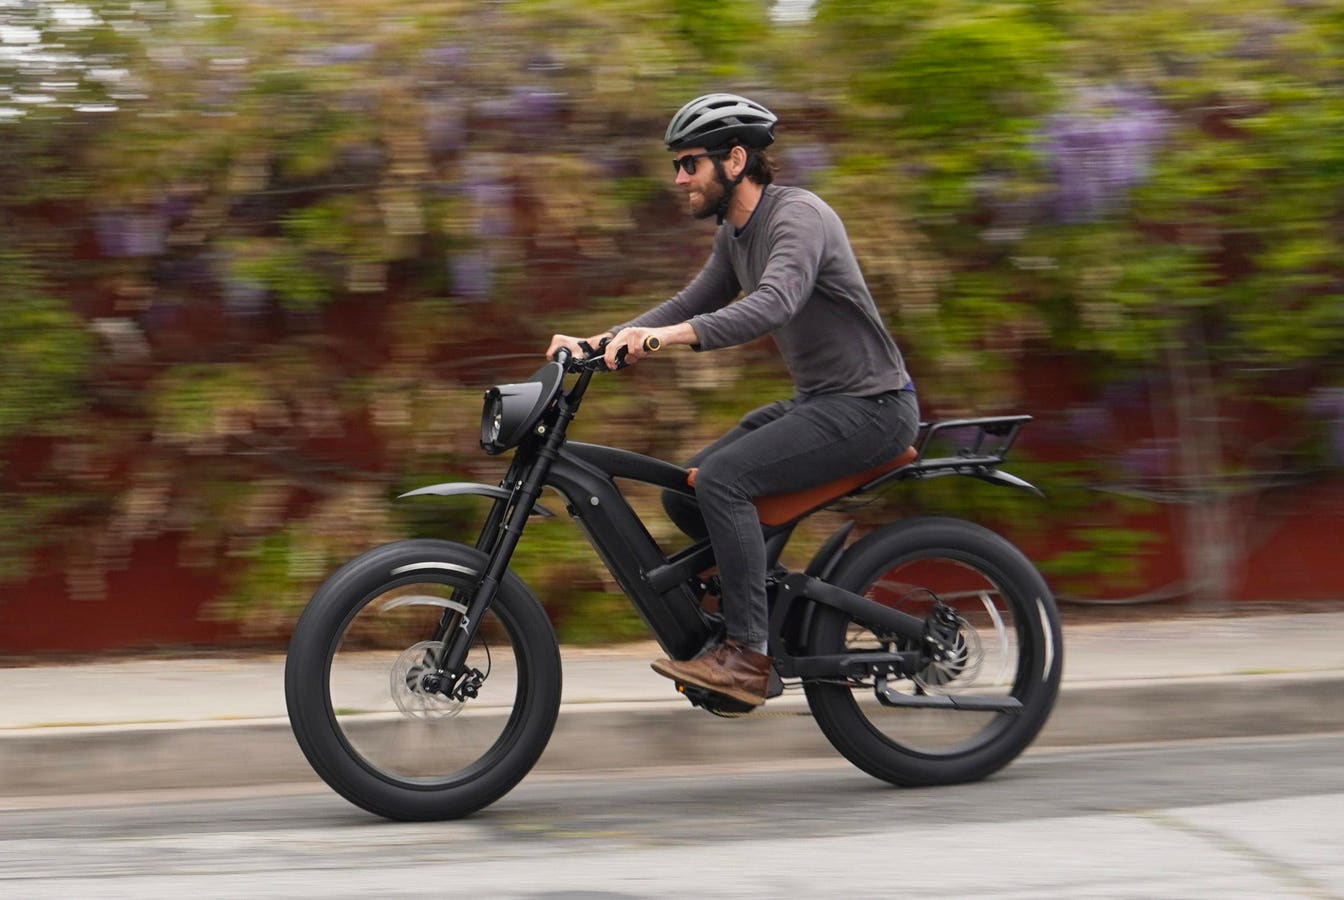 Test-Riding The QuietKat Lynx, A Retro-Styled E-Bike For The Masses